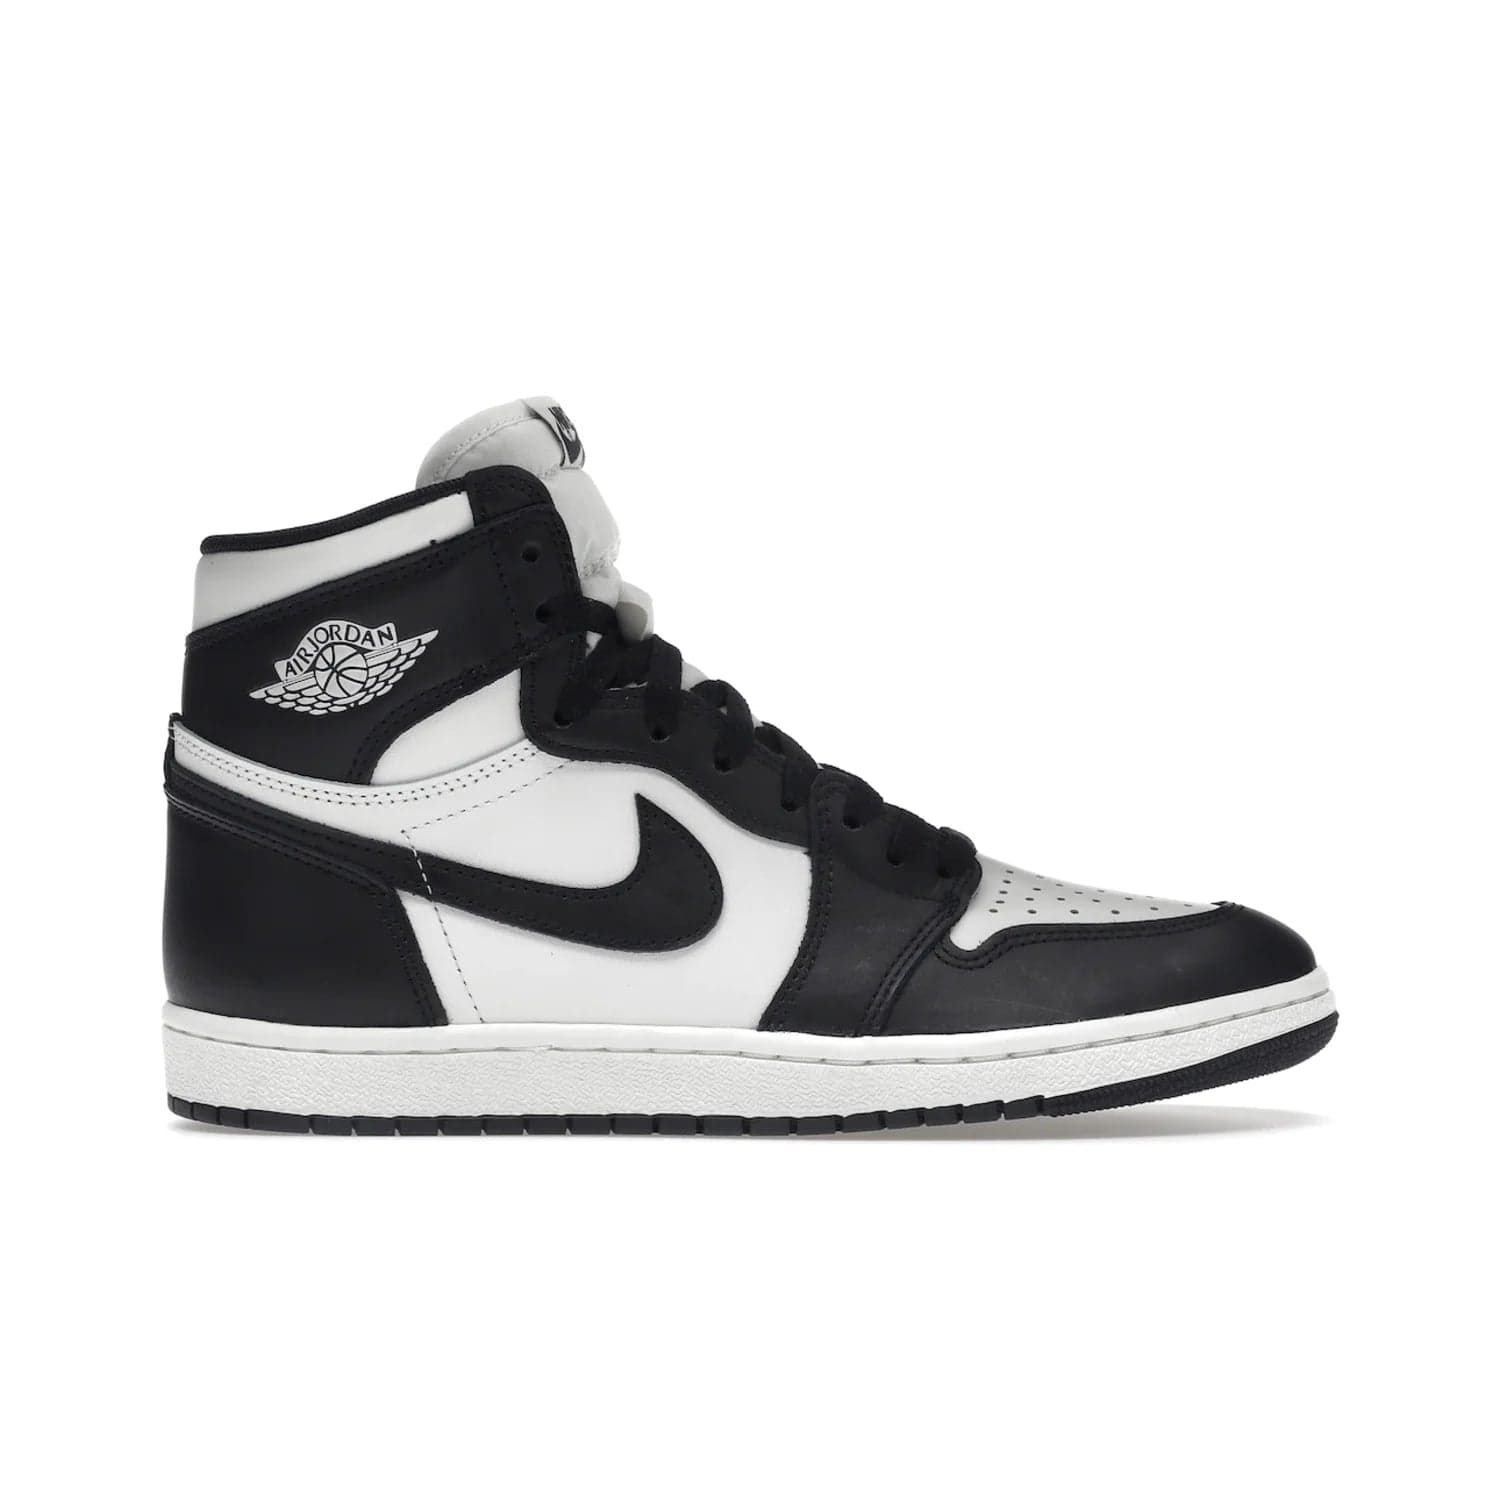 Jordan 1 Retro High 85 Black White (2023) - Image 1 - Only at www.BallersClubKickz.com - Brand new Jordan 1 Retro High 85 Black White (2023) now available. A classic color scheme of black and white leather uppers with signature Nike Air logo on the tongue. Must-have for any Air Jordan fan. Available February 15, 2023.